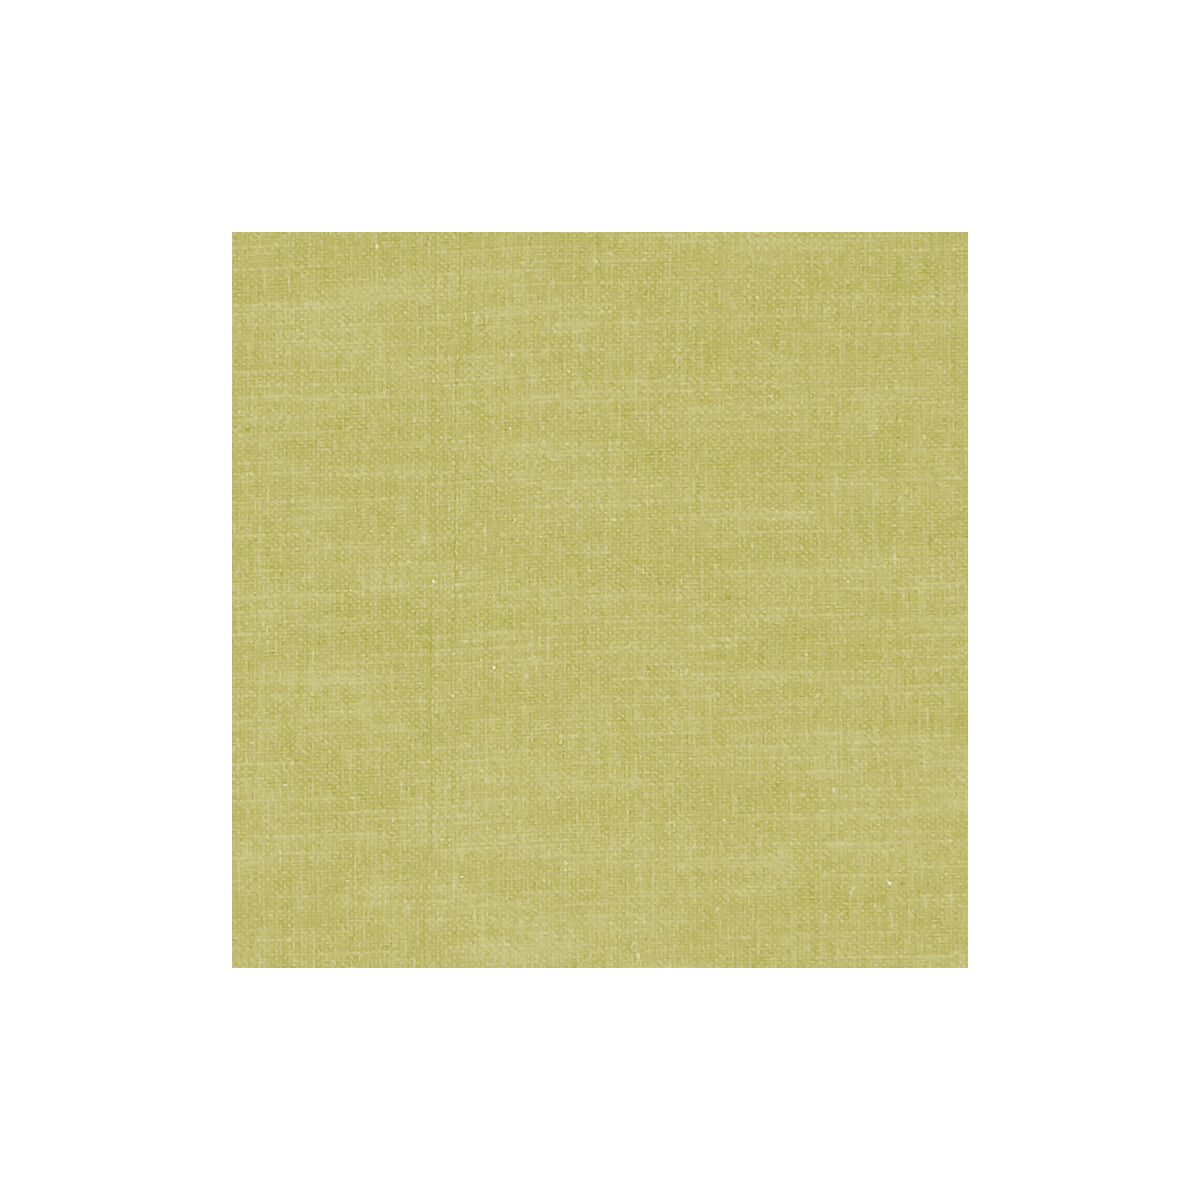 Amalfi fabric in citron color - pattern F1239/11.CAC.0 - by Clarke And Clarke in the Clarke &amp; Clarke Amalfi collection